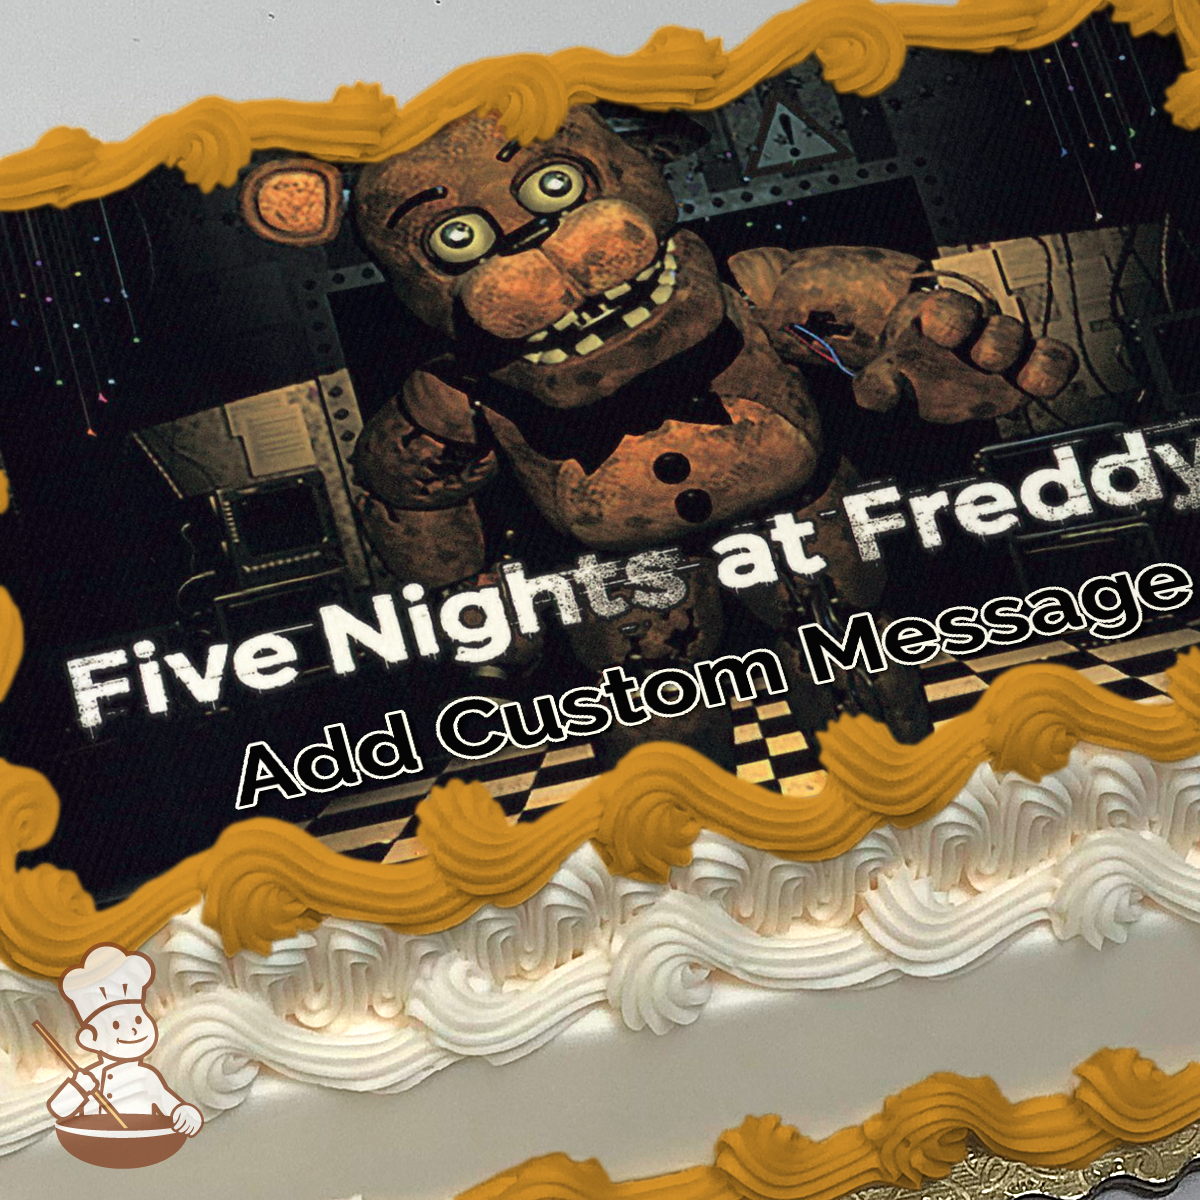 Five nights at freddys Birthday Party Ideas, Photo 1 of 16